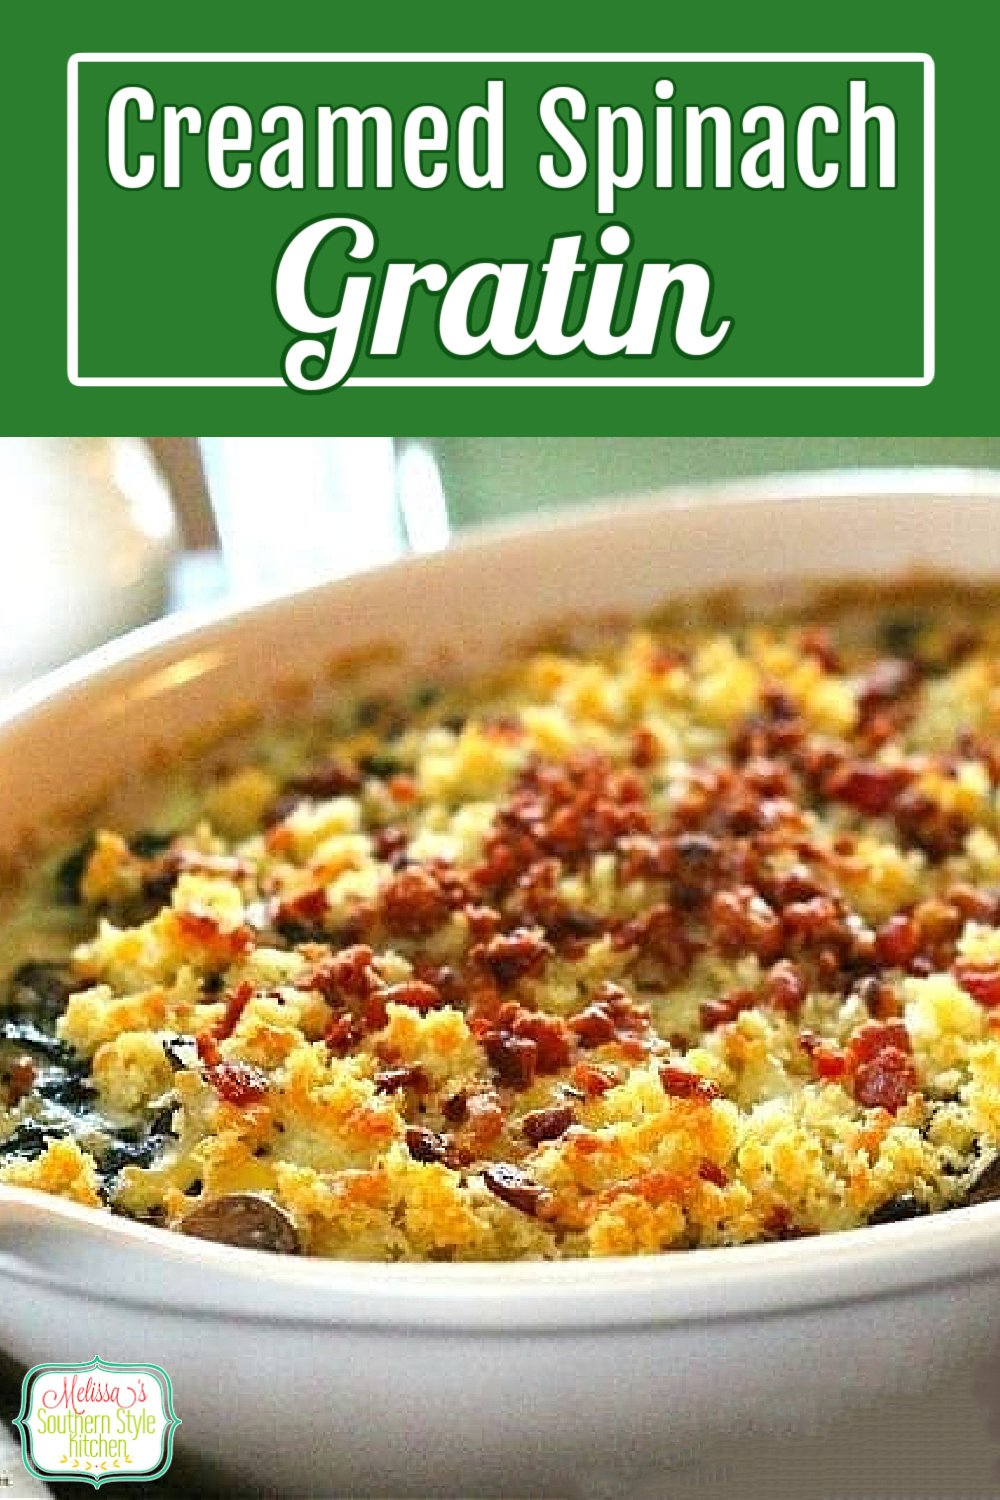 This Creamed Spinach Gratin with Bacon is the perfect side dish for the holidays, date night or casual entertaining with friends #creamedspinach #spinachgratin #spinachrecipes #spinachcasserole #bacon #mushrooms #spinach #christmasrecipes #thansgivingrecipes via @melissasssk